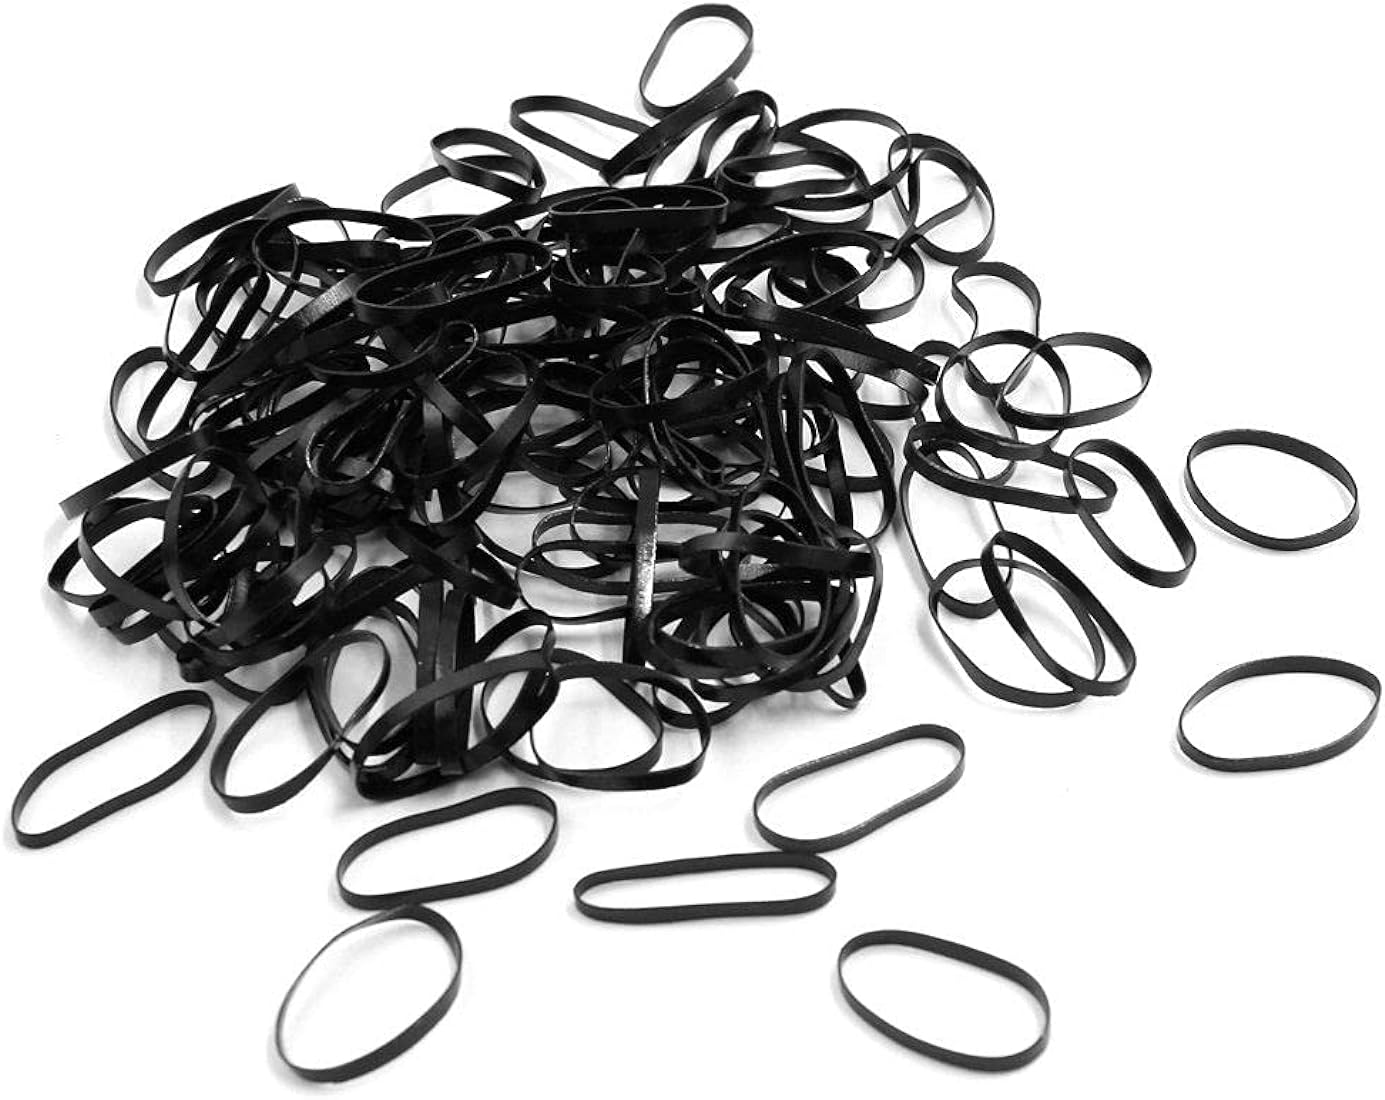 BLACK RUBBER BAND